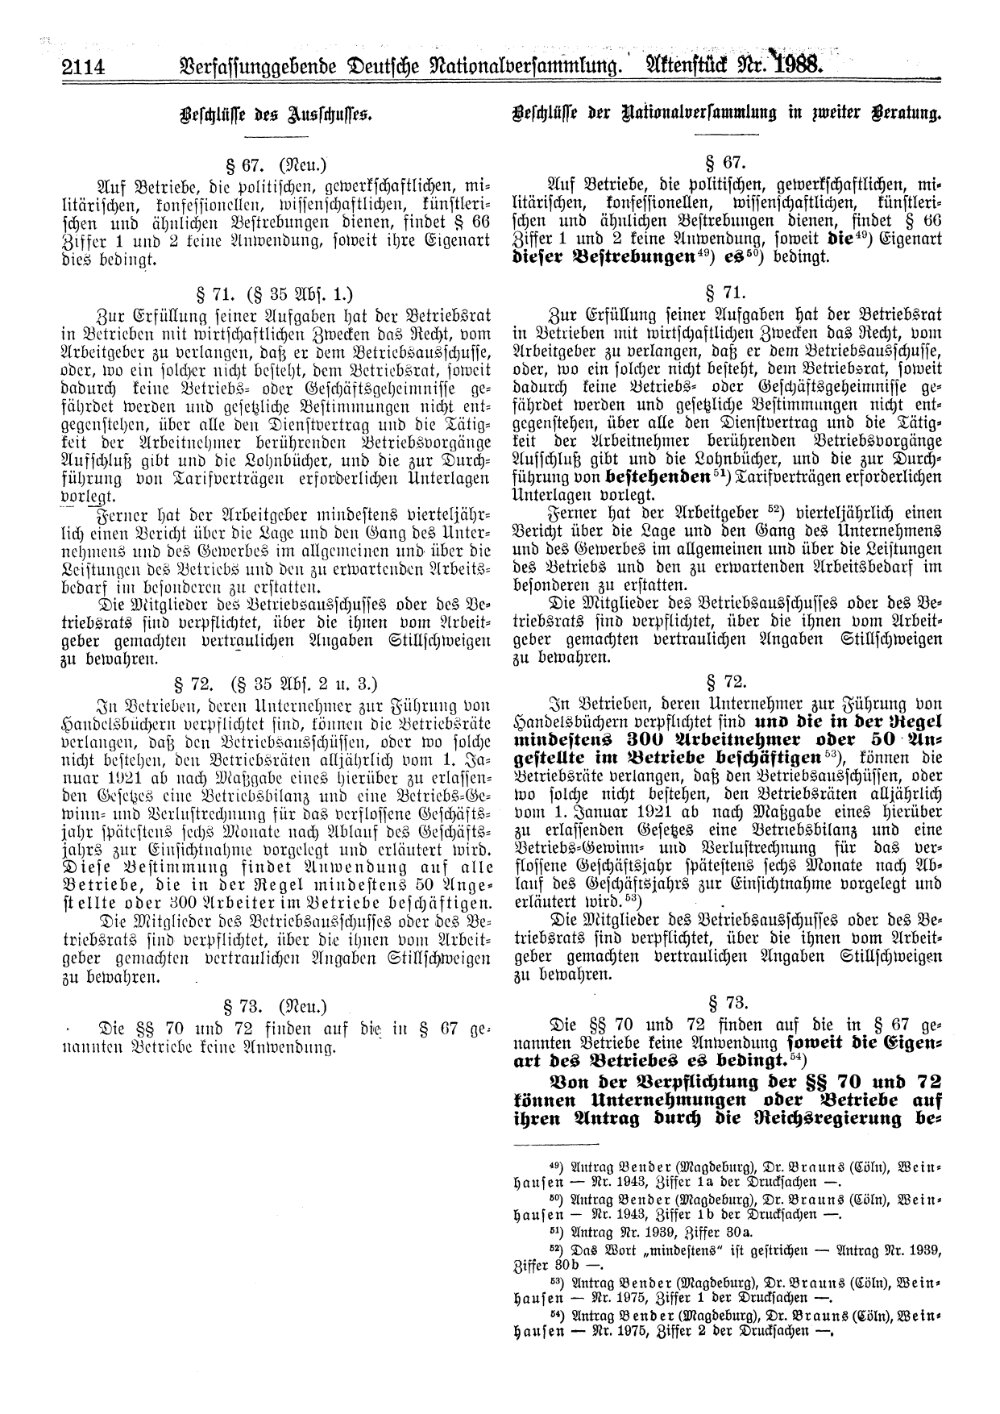 Scan of page 2114